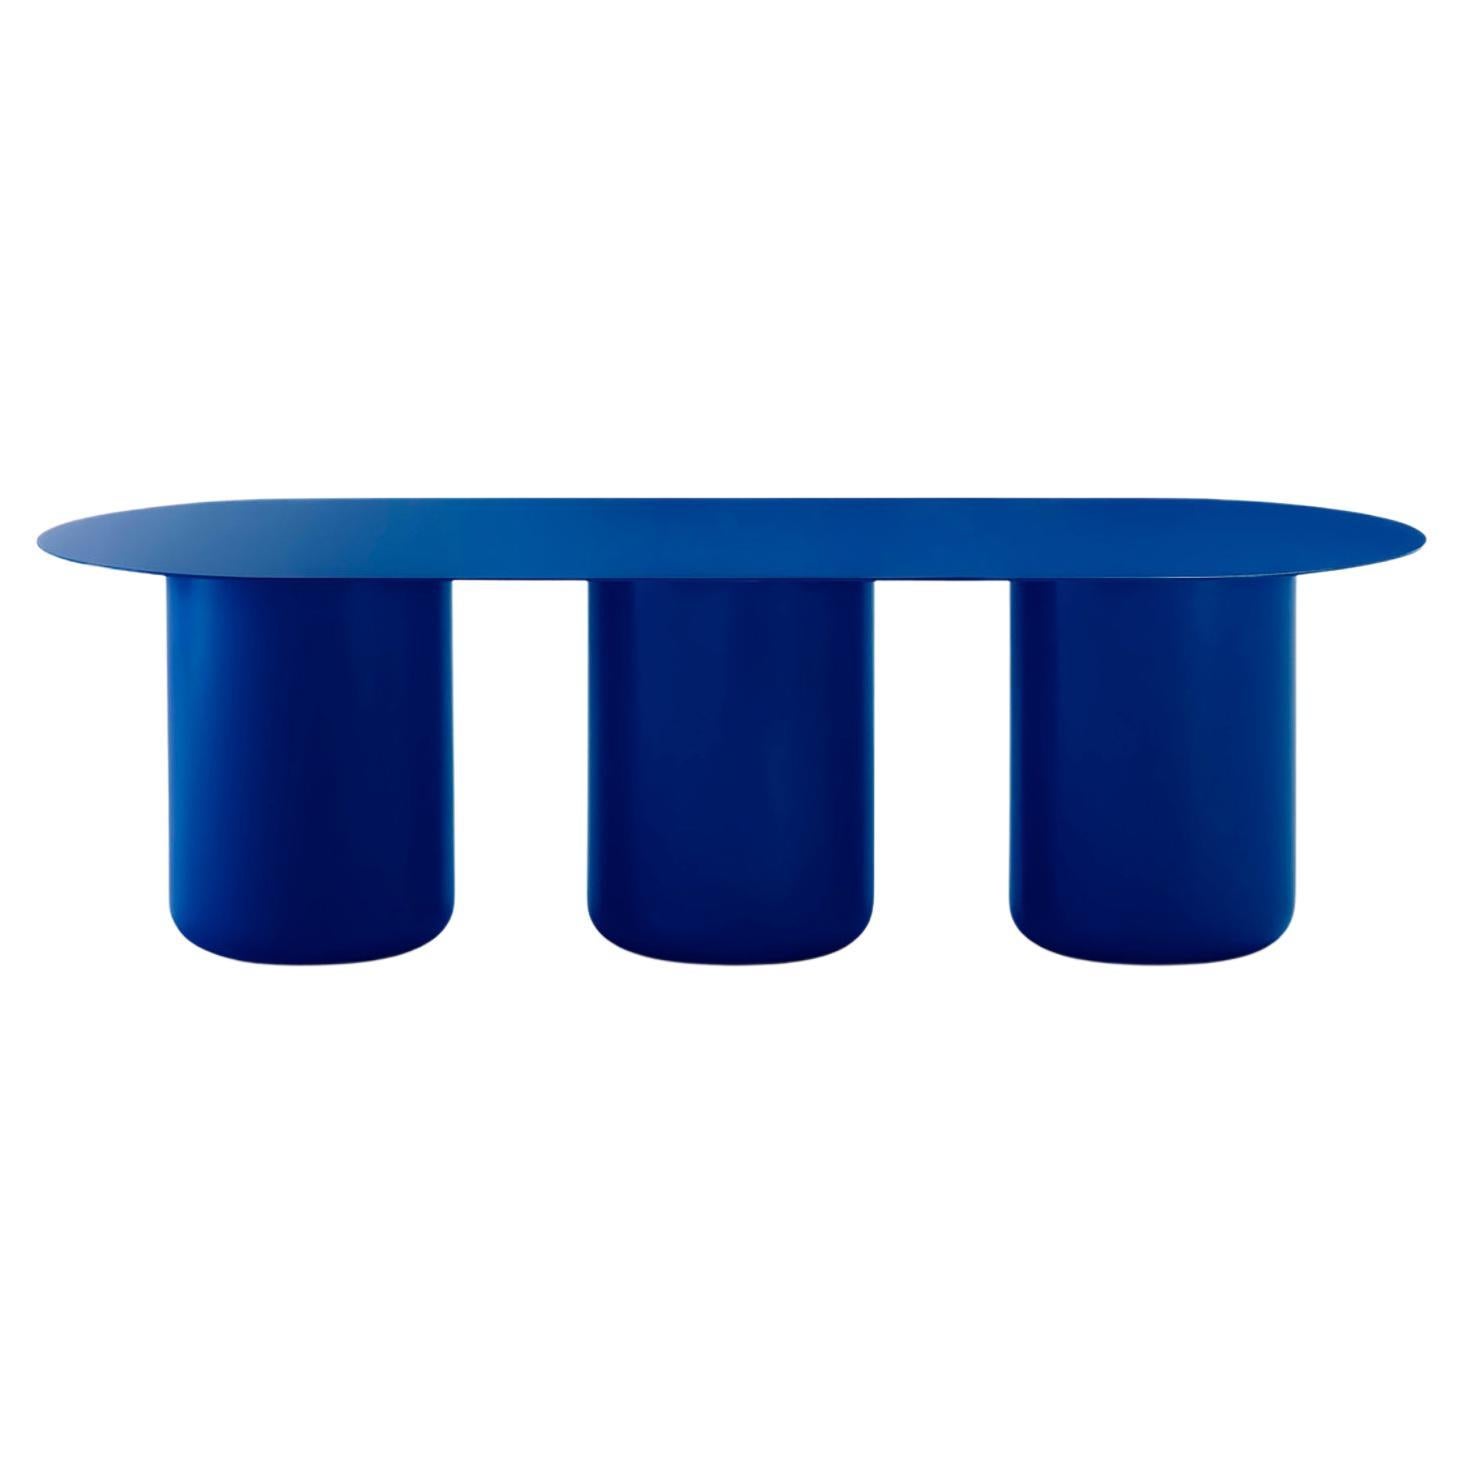 Vivid Blue Table 03 by Coco Flip For Sale